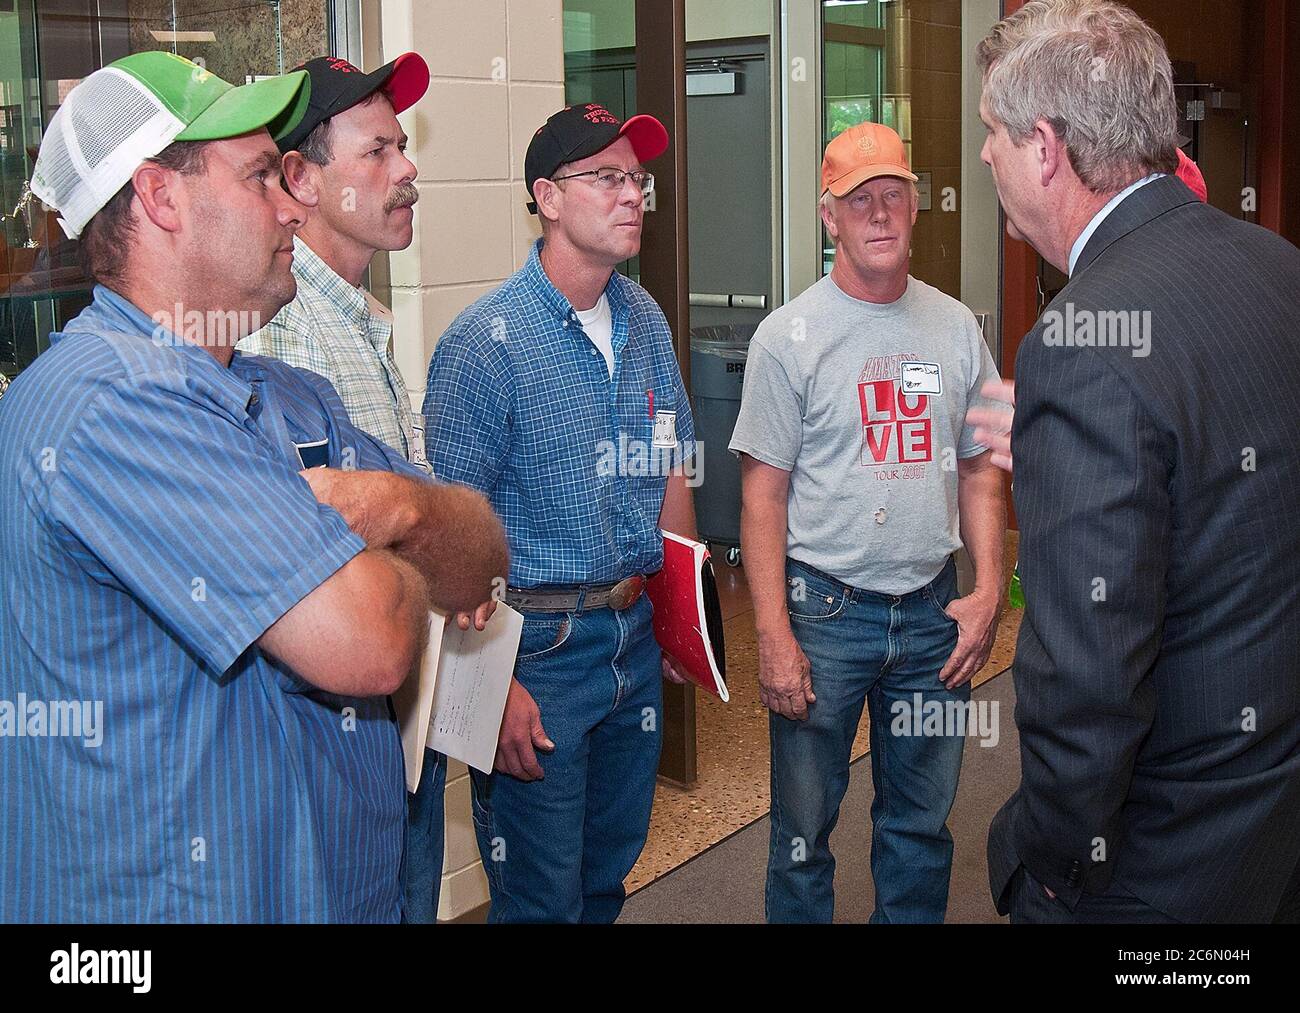 From left: Farmers Steve Roth, Done Rief, Dale Rief, Clifford Dilts discuss topics covered during a town hall meeting with Agriculture Secretary Tom Vilsack at the Glenwood Community High School in Glenwood, Iowa Thur., June 16, 2011. Farmers, local and regional media listened and questioned Secretary Vilsack on the cause of the floodwaters along the Missouri River affecting Iowa and Nebraska. Secretary Vilsack offered advice and assistance available through the United States Department of Agriculture and other federal agencies. Stock Photo